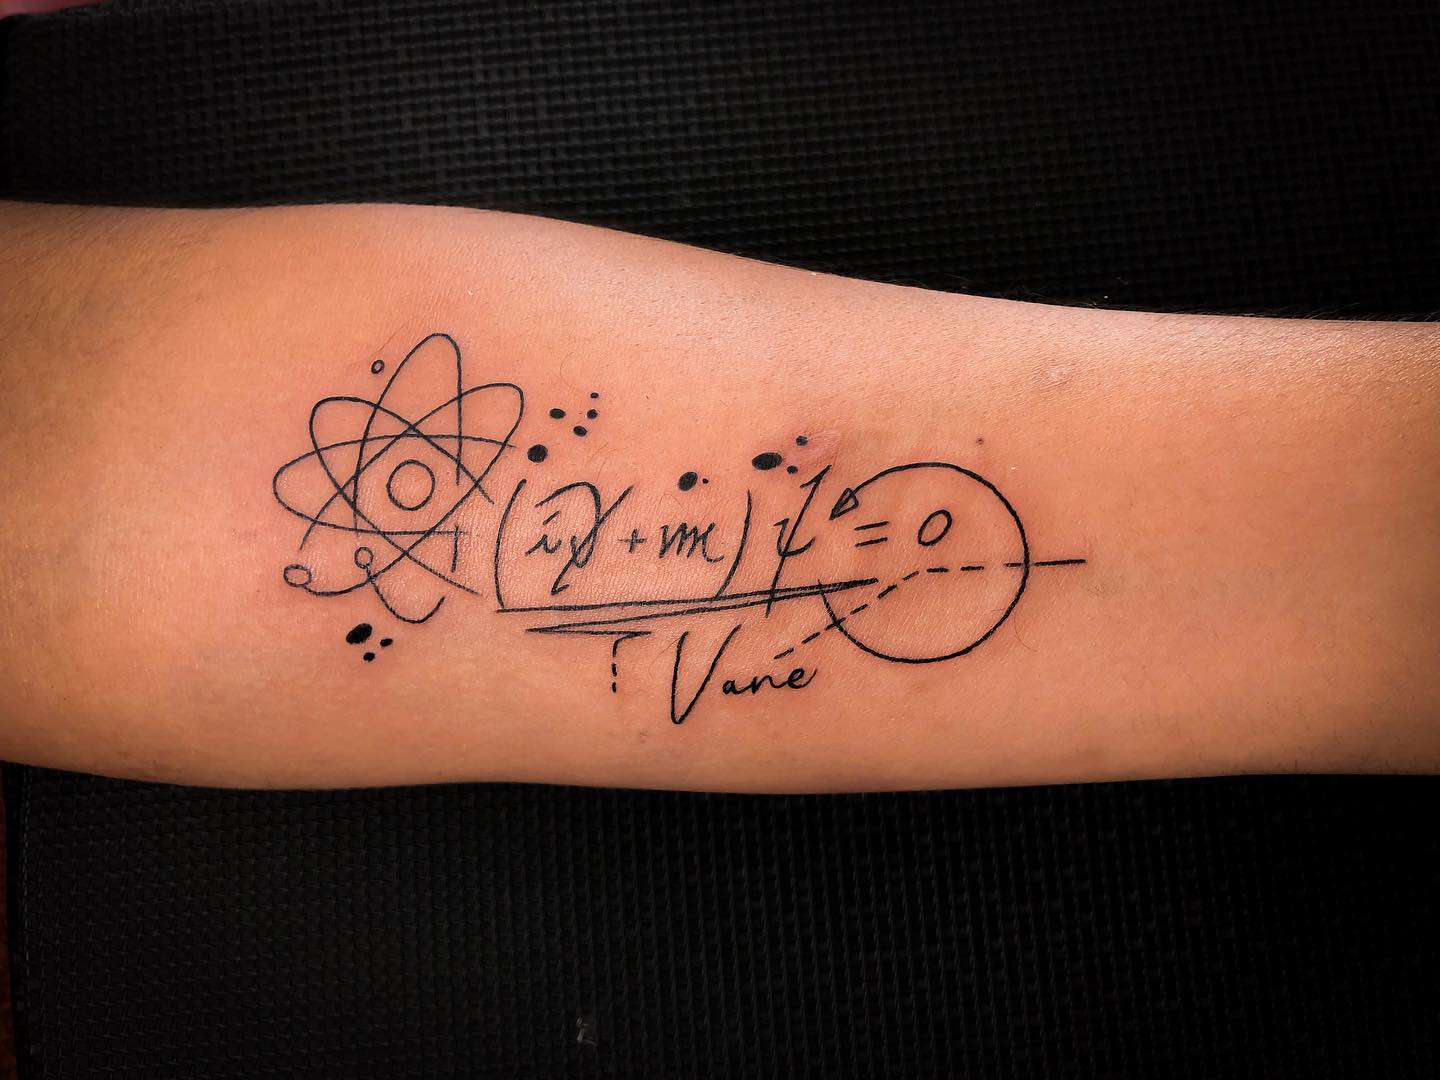 120 Meaningful Tattoo Ideas To Add Significance To Your Ink